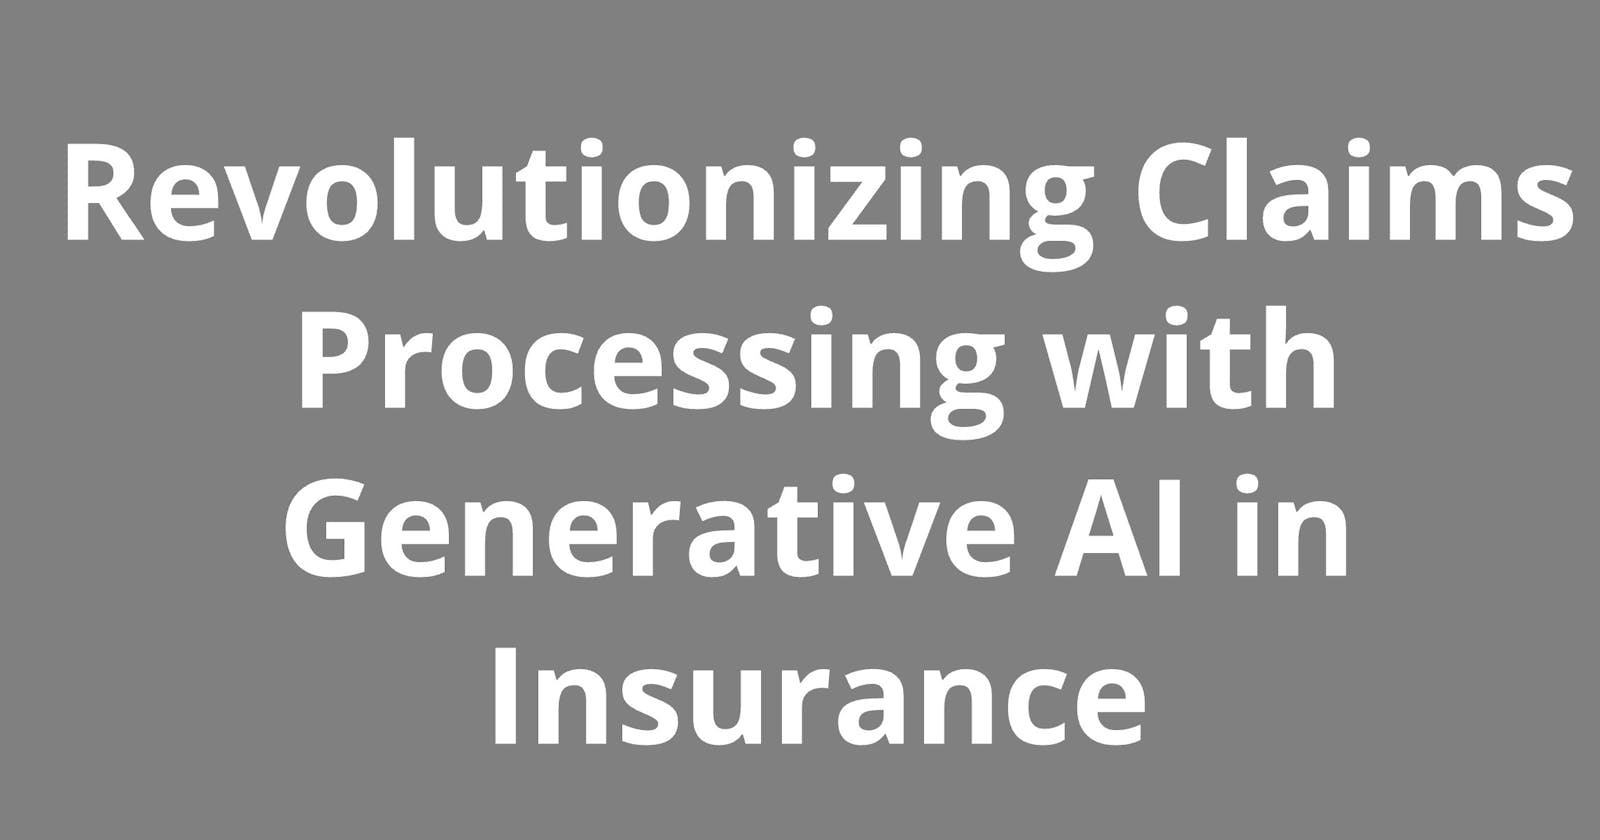 Revolutionizing Claims Processing with Generative AI in Insurance